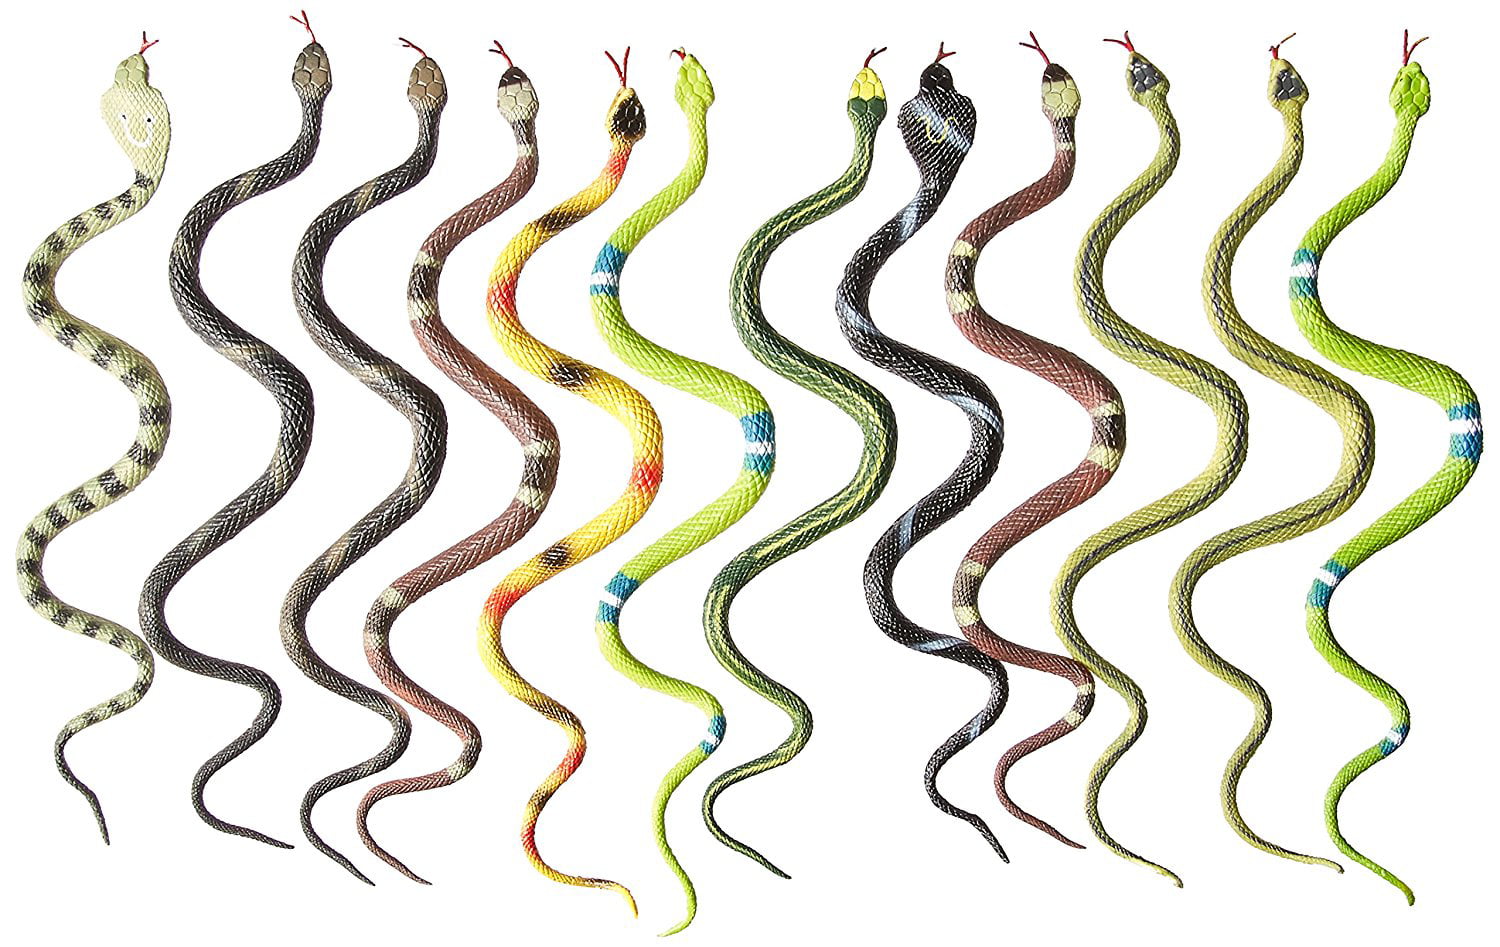 Gag Toys Rubber Snake Toy Collection; Rubber Snakes Pranks Snake Boy Party Favors for Boys Kangaroos Rain Forest Toy Snake Assortment